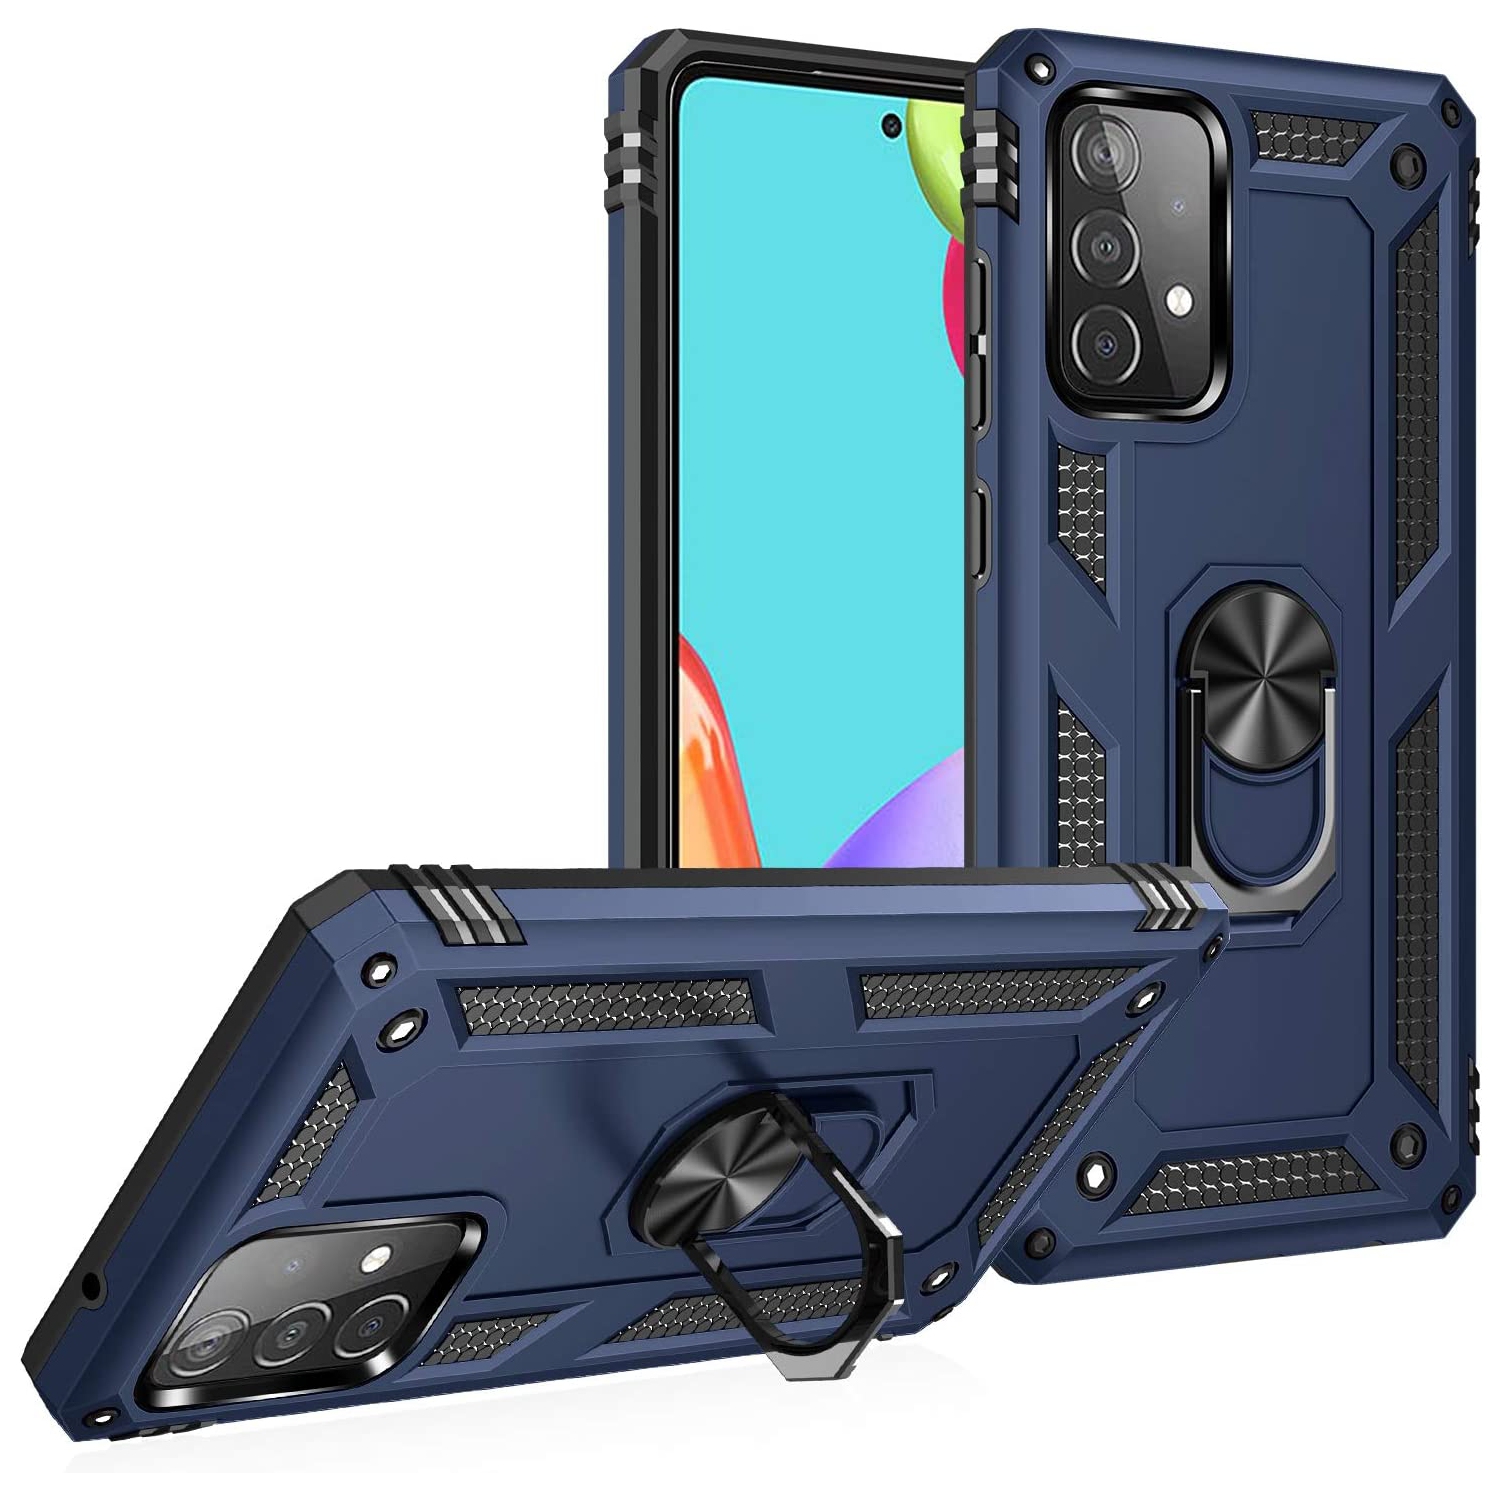 Samsung Galaxy A52 Case for Samsung A52 Basic Cases Rugged Military Grade Heavy Duty Armor Shockproof Anti-Drop A52 4G/5G Phone Case